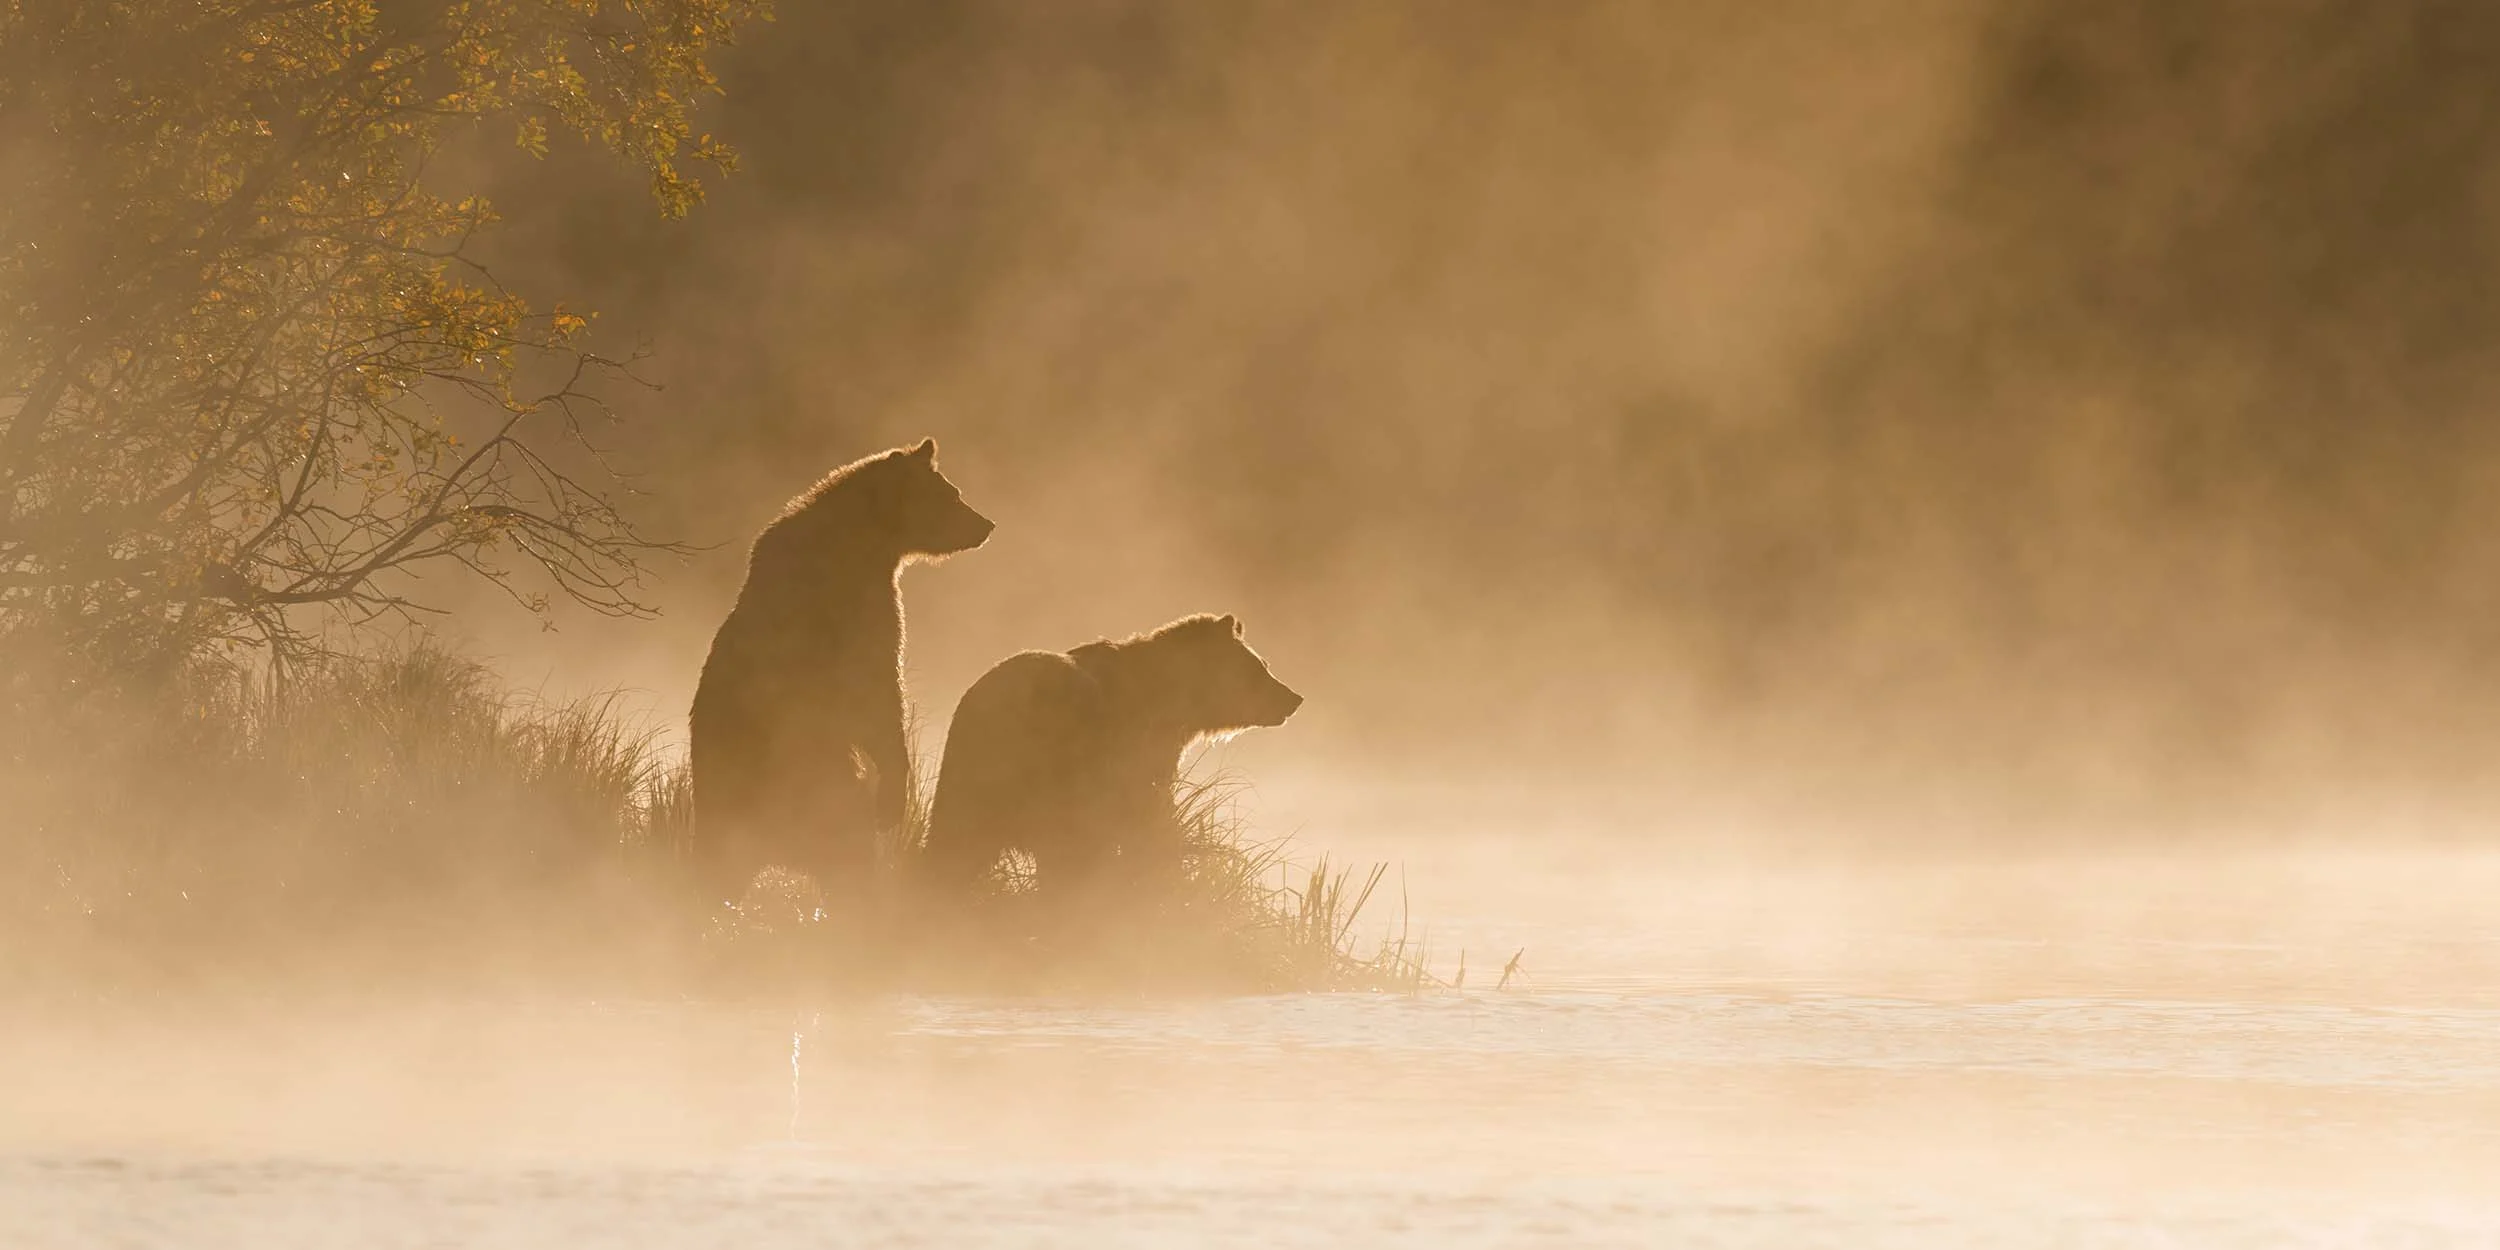 Search for wildlife like the mighty grizzly bear.